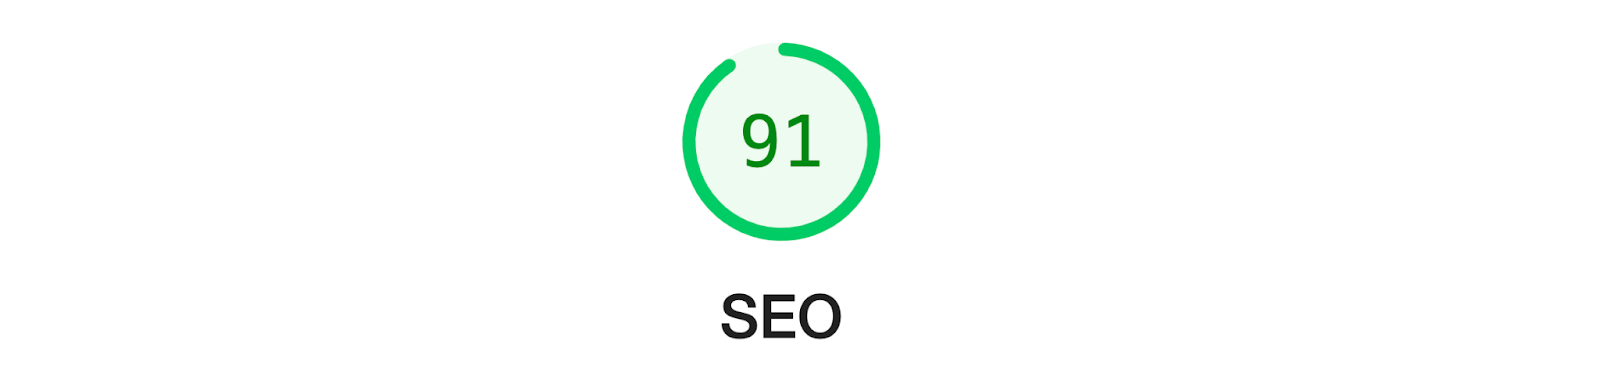 A 91% SEO score in Google Lighthouse implies a site is following proper, basic seo site structure.